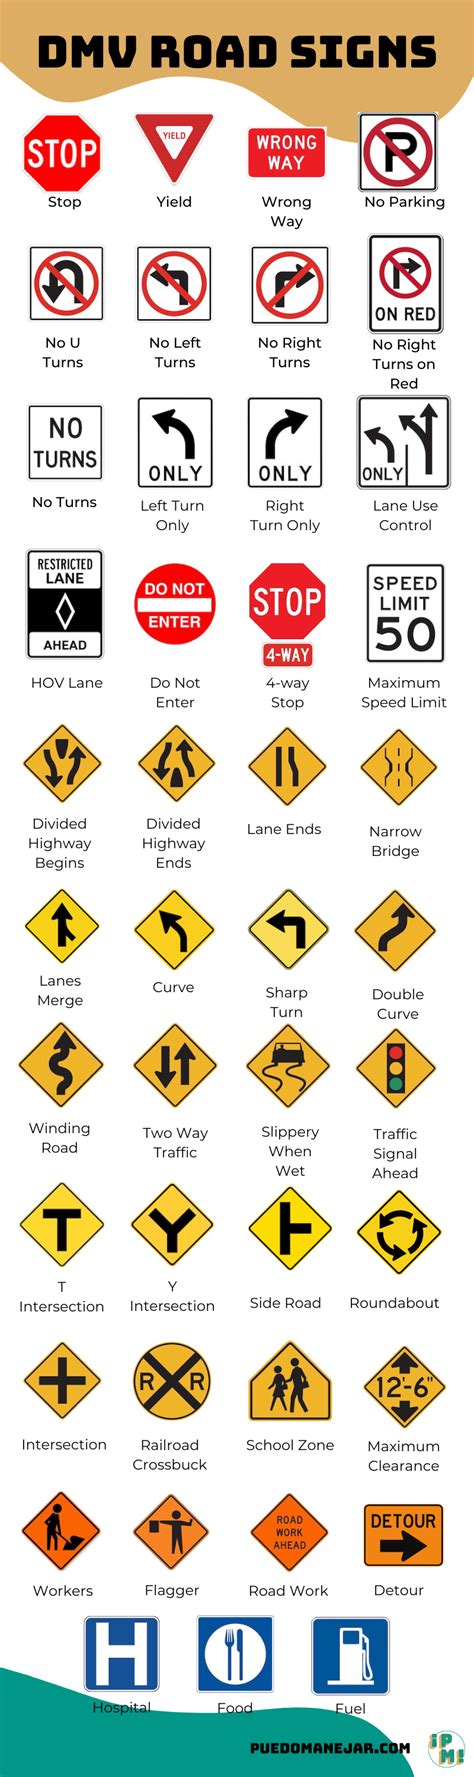 Street signs dmv test. The Tennessee DOS permit test will include a number of questions dedicated to road signs and pavement markings. In studying road signs for the permit test, you will need a copy of the TN DMV handbook, a reliable driver’s education course which can teach you about road sign categories, and access to realistic permit practice test questions. 